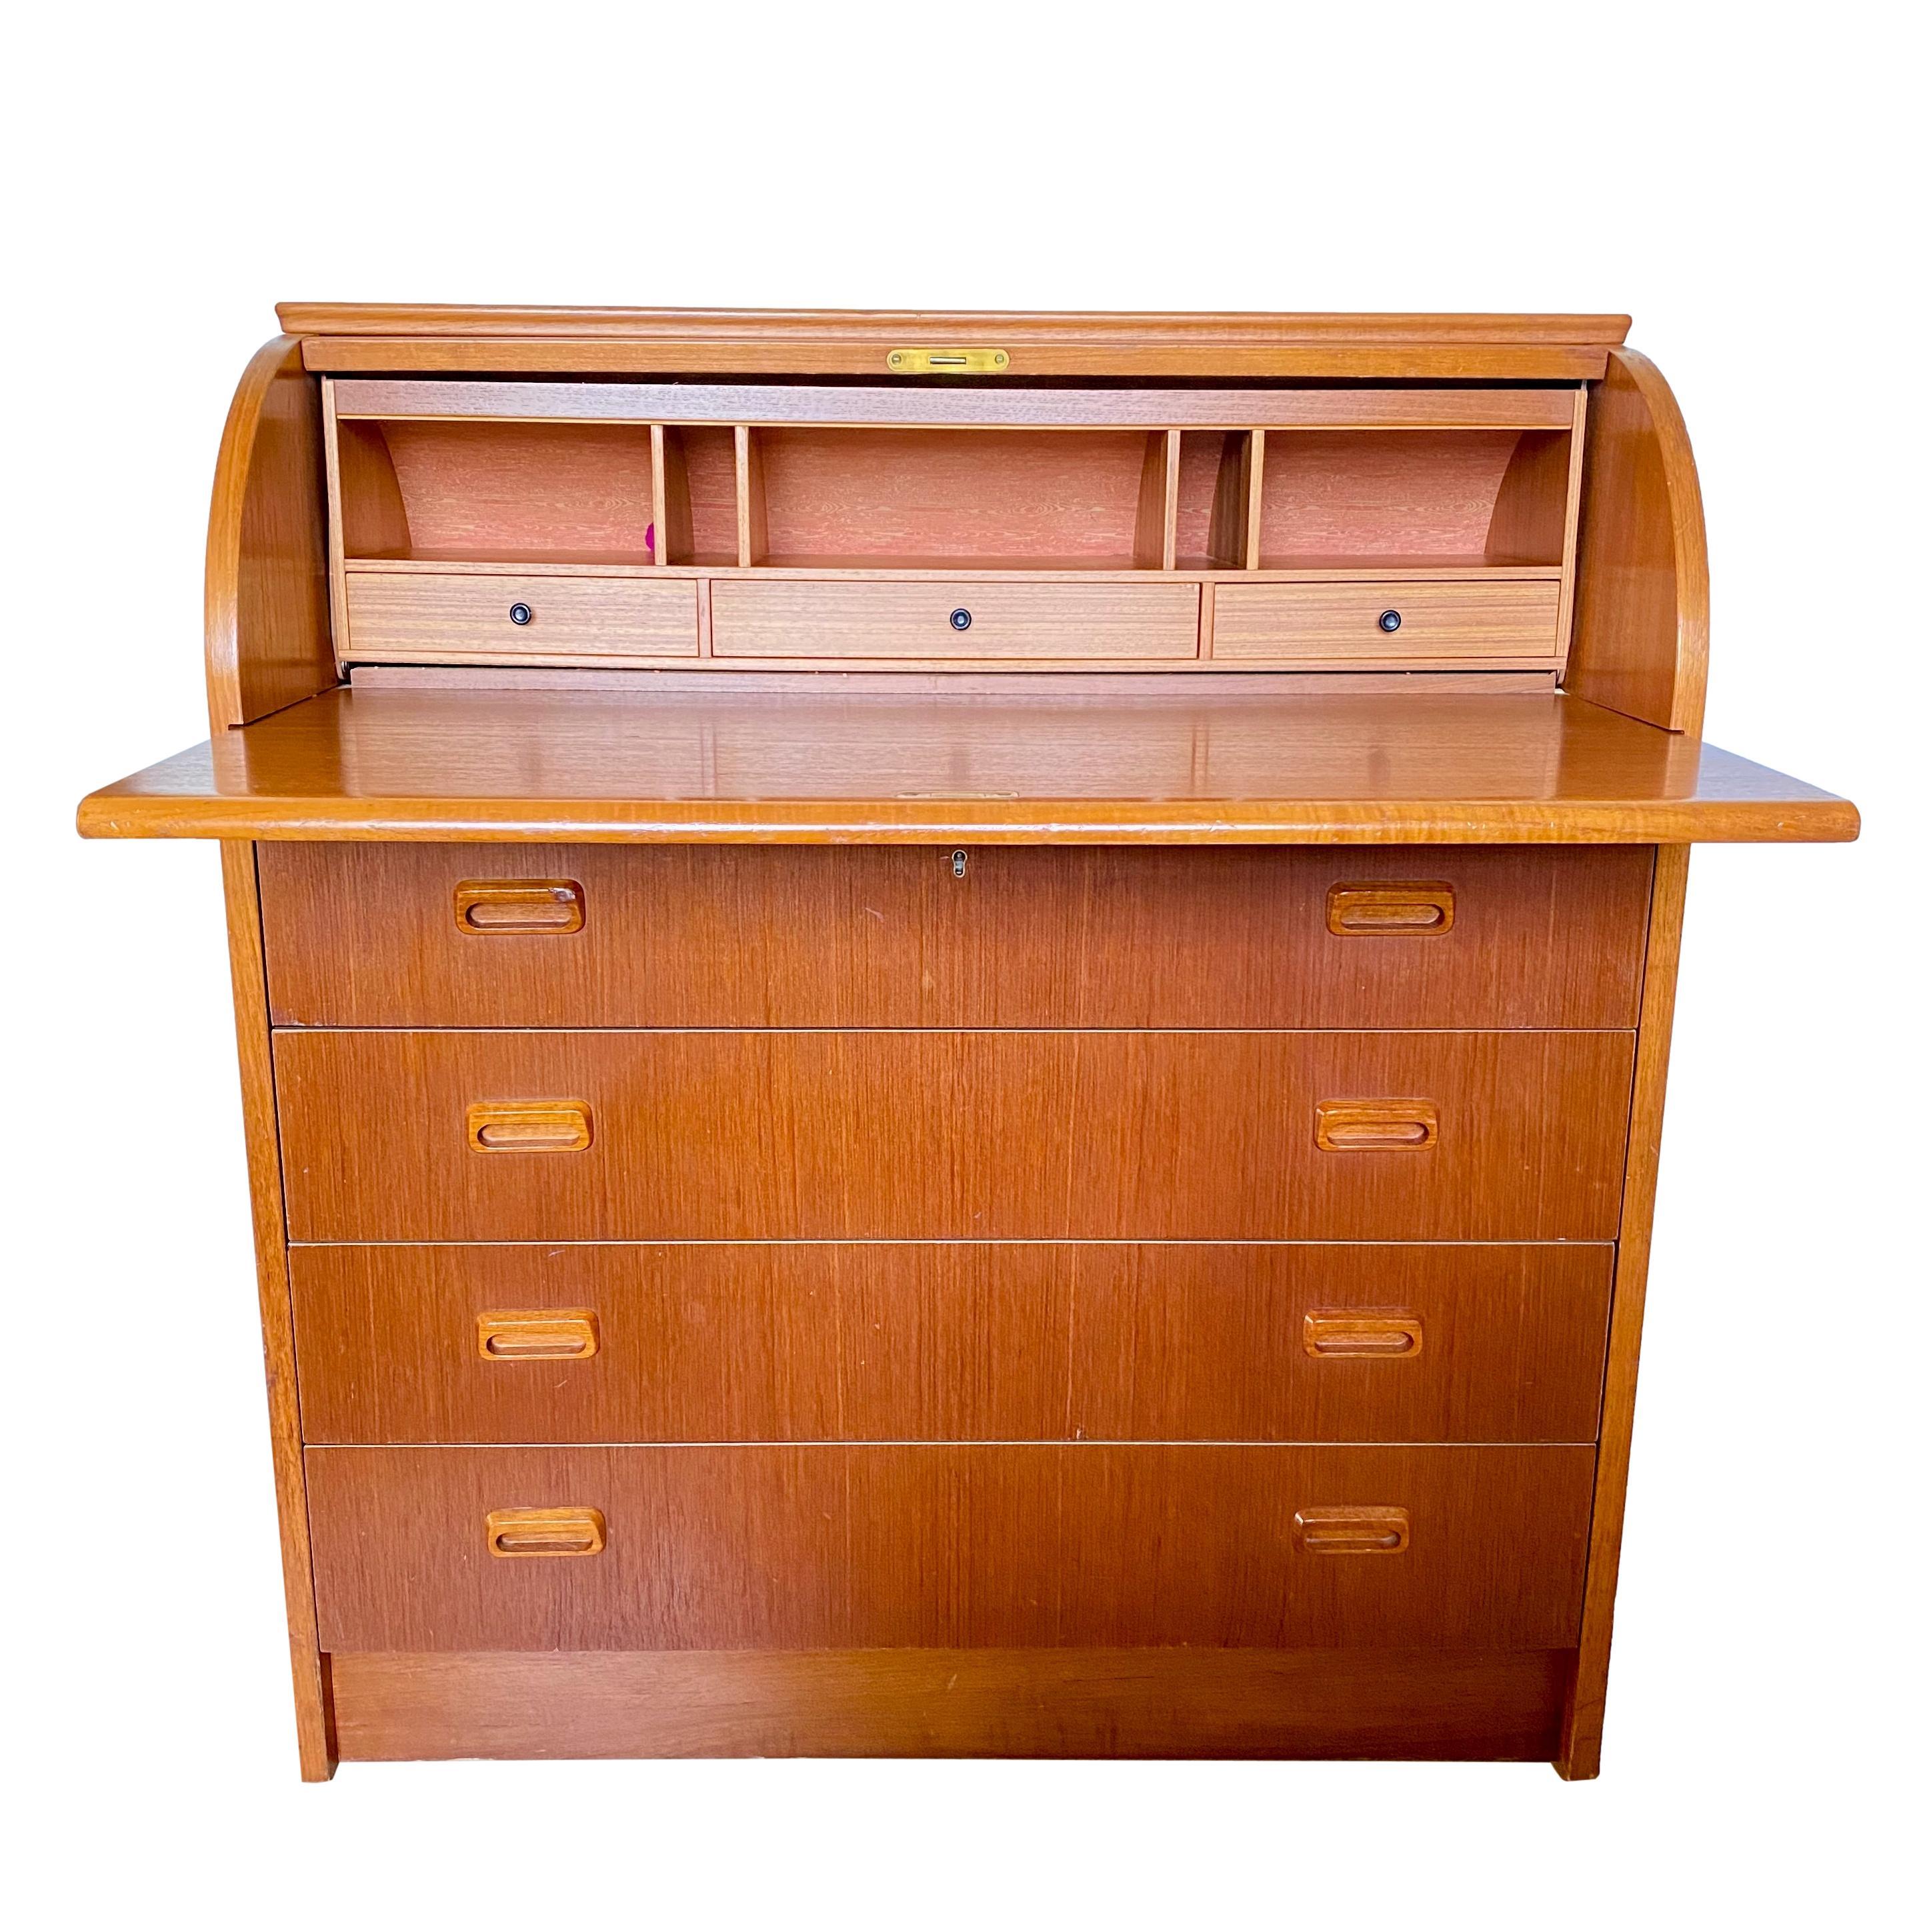 A vintage 1960's Swedish modern teak roll-top desk/bureau. Featuring a roll-up top, extendable desk surface, five storage cubbies, three upper drawers and four lower drawers with sculpted recessed handles.

Dimensions: 35.5